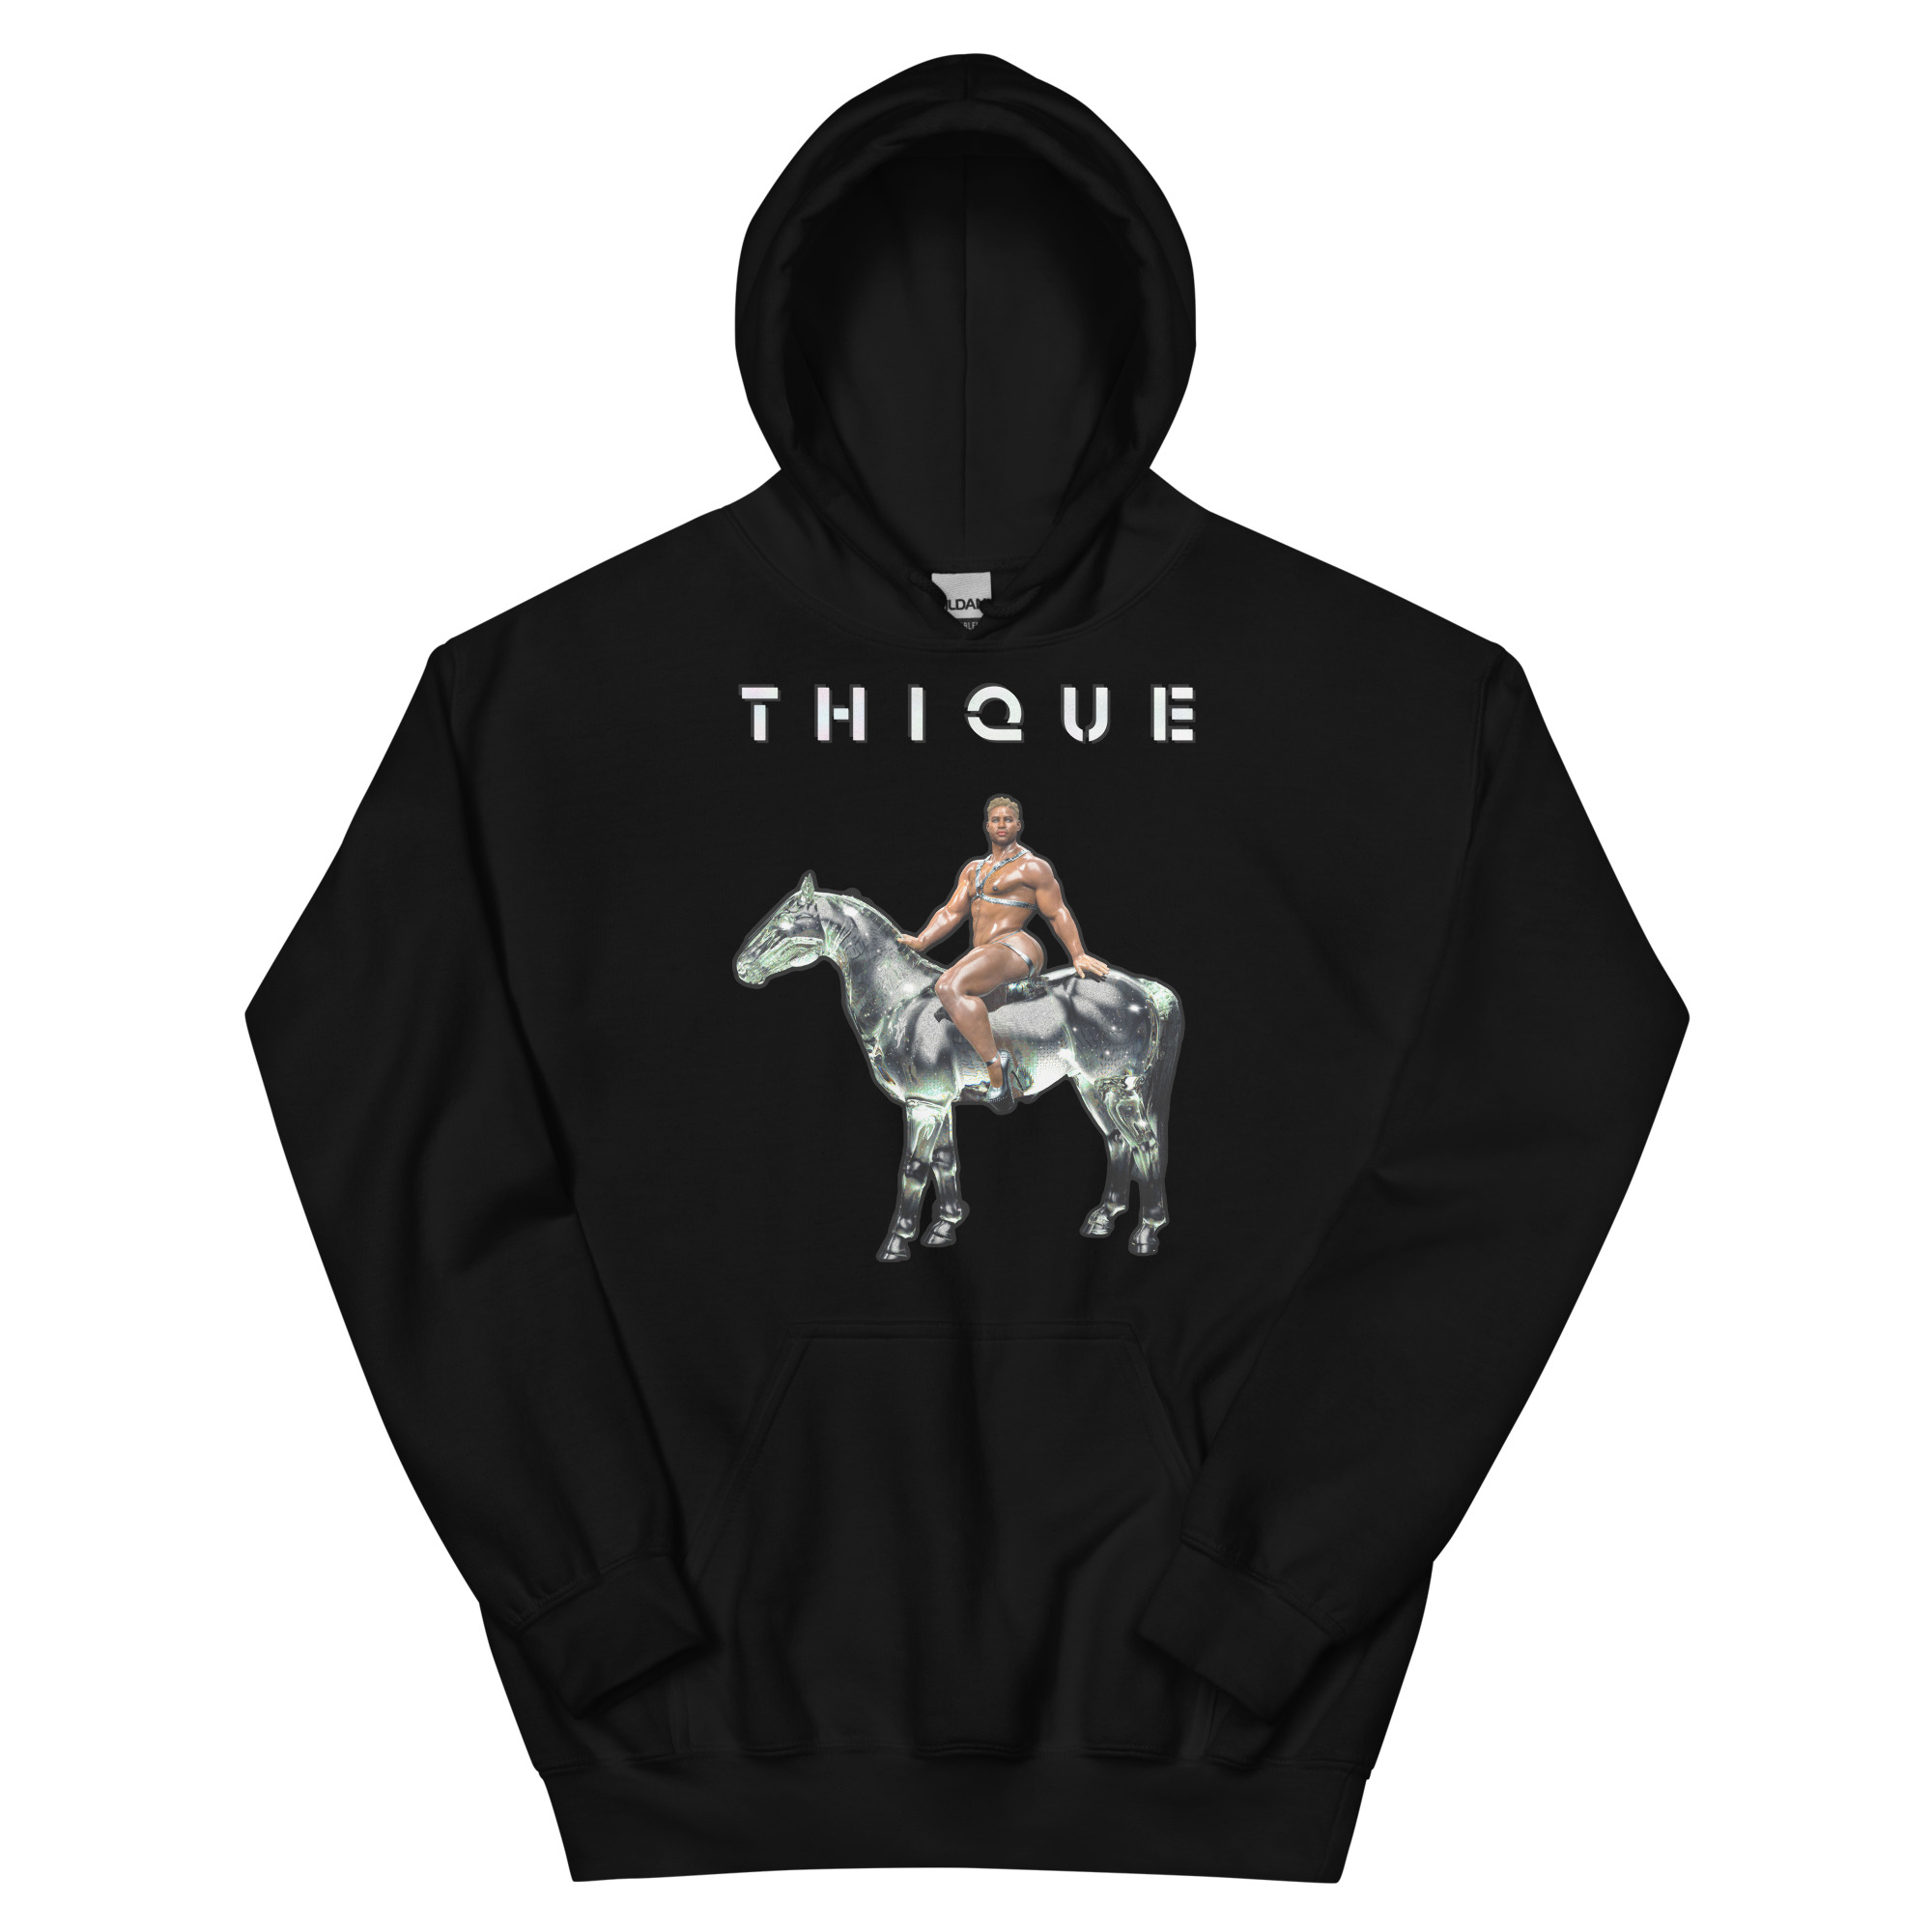 Featured image for “THIQUE - Unisex Gildan Hoodie”